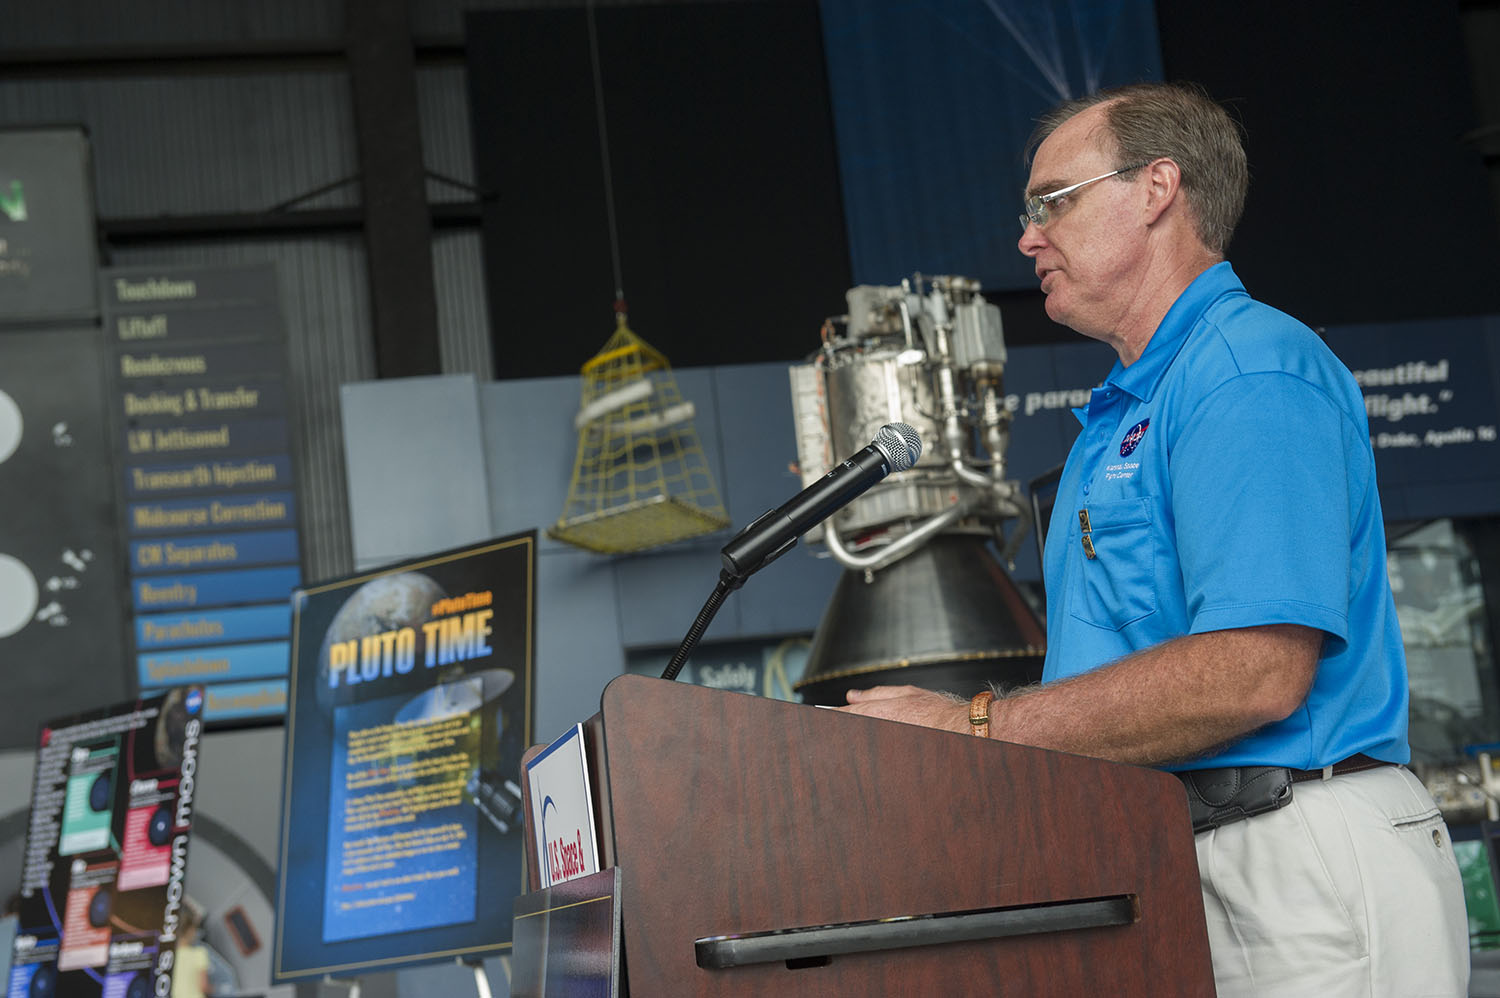 Brian Key, deputy manager of the Planetary Missions Program Office at MSFC